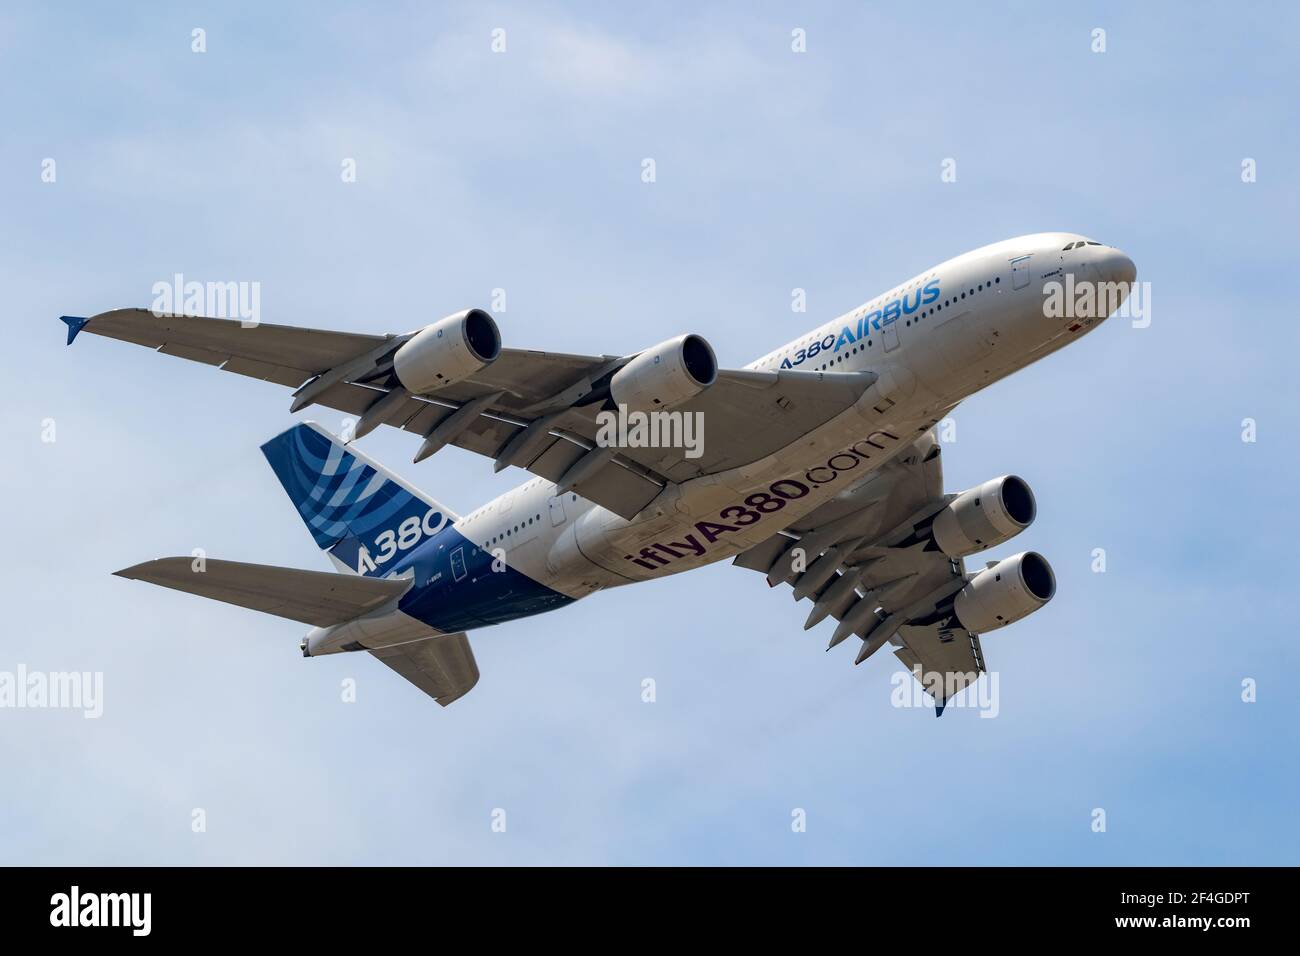 Airbus A380 double-decker passenger plane in flight during the Paris Air Show. France - June 22, 2017 Stock Photo